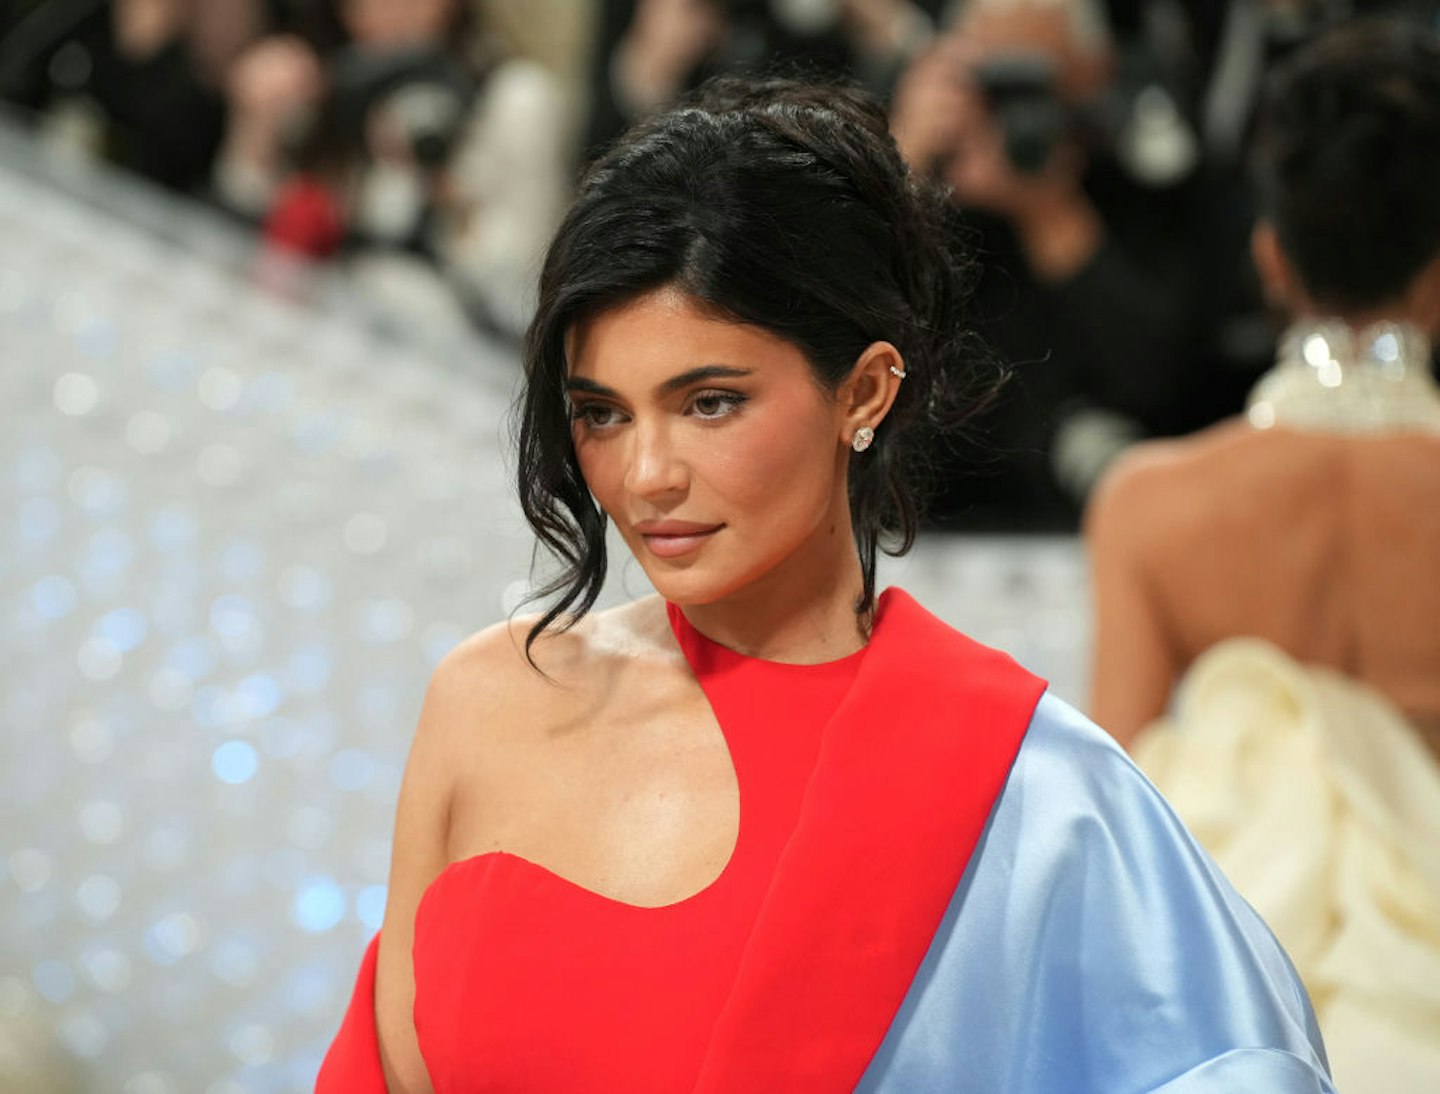 Kylie Jenner's Outfit Is So Unexpected for Her—and We Love It